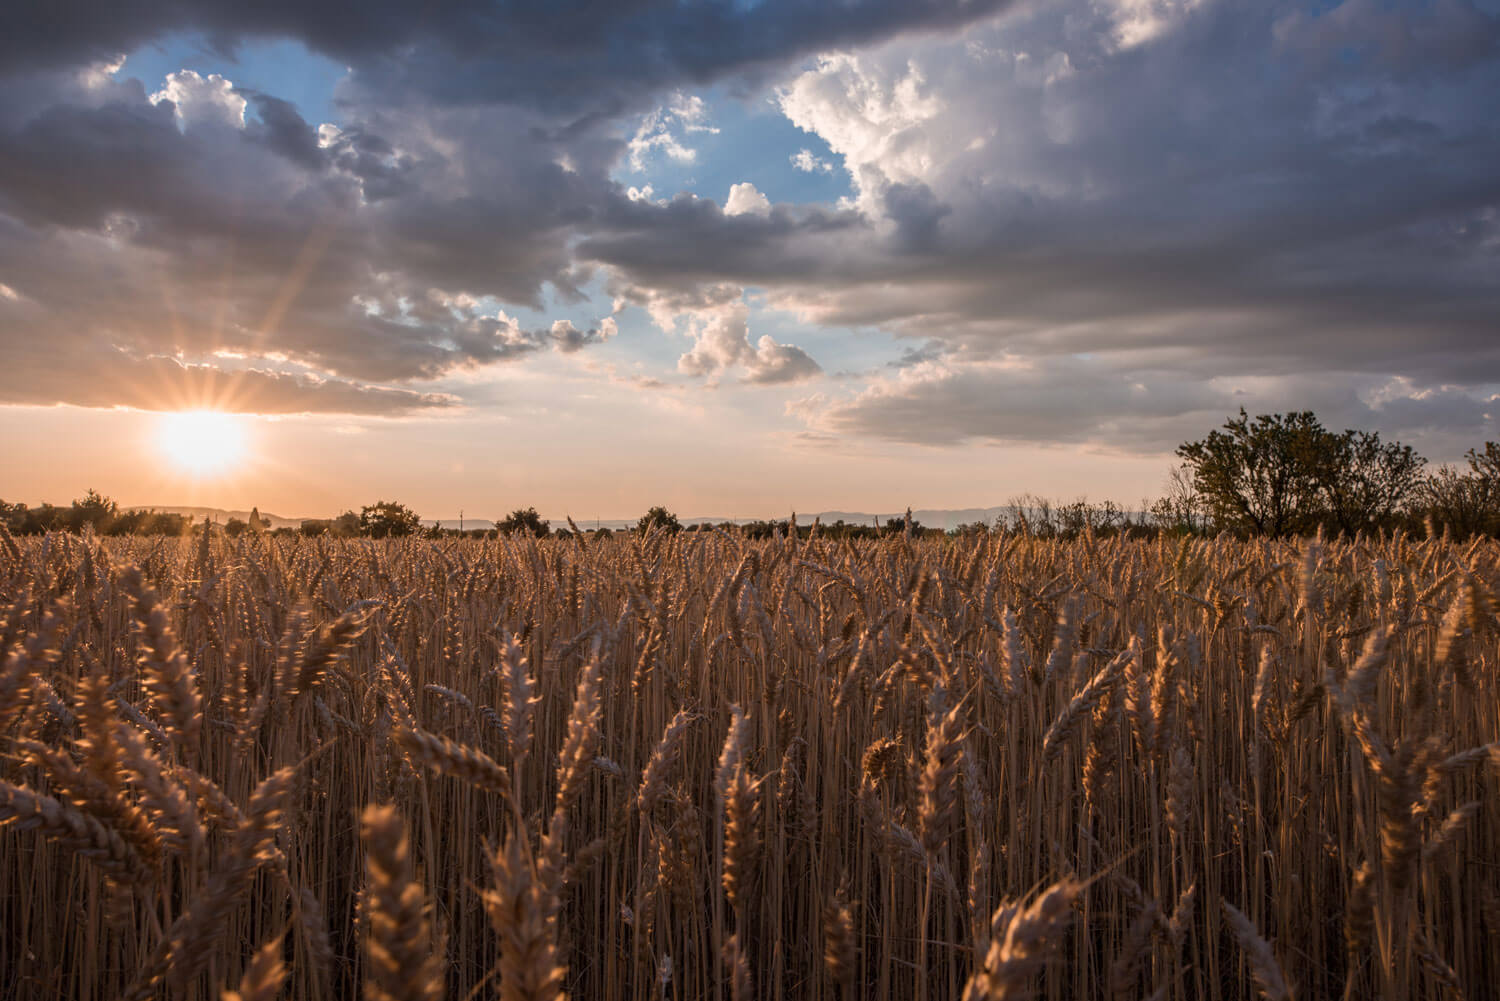 A vast field of golden wheat swaying gently in the breeze, bathed in the warm light of a dramatic sunset in Kansas.